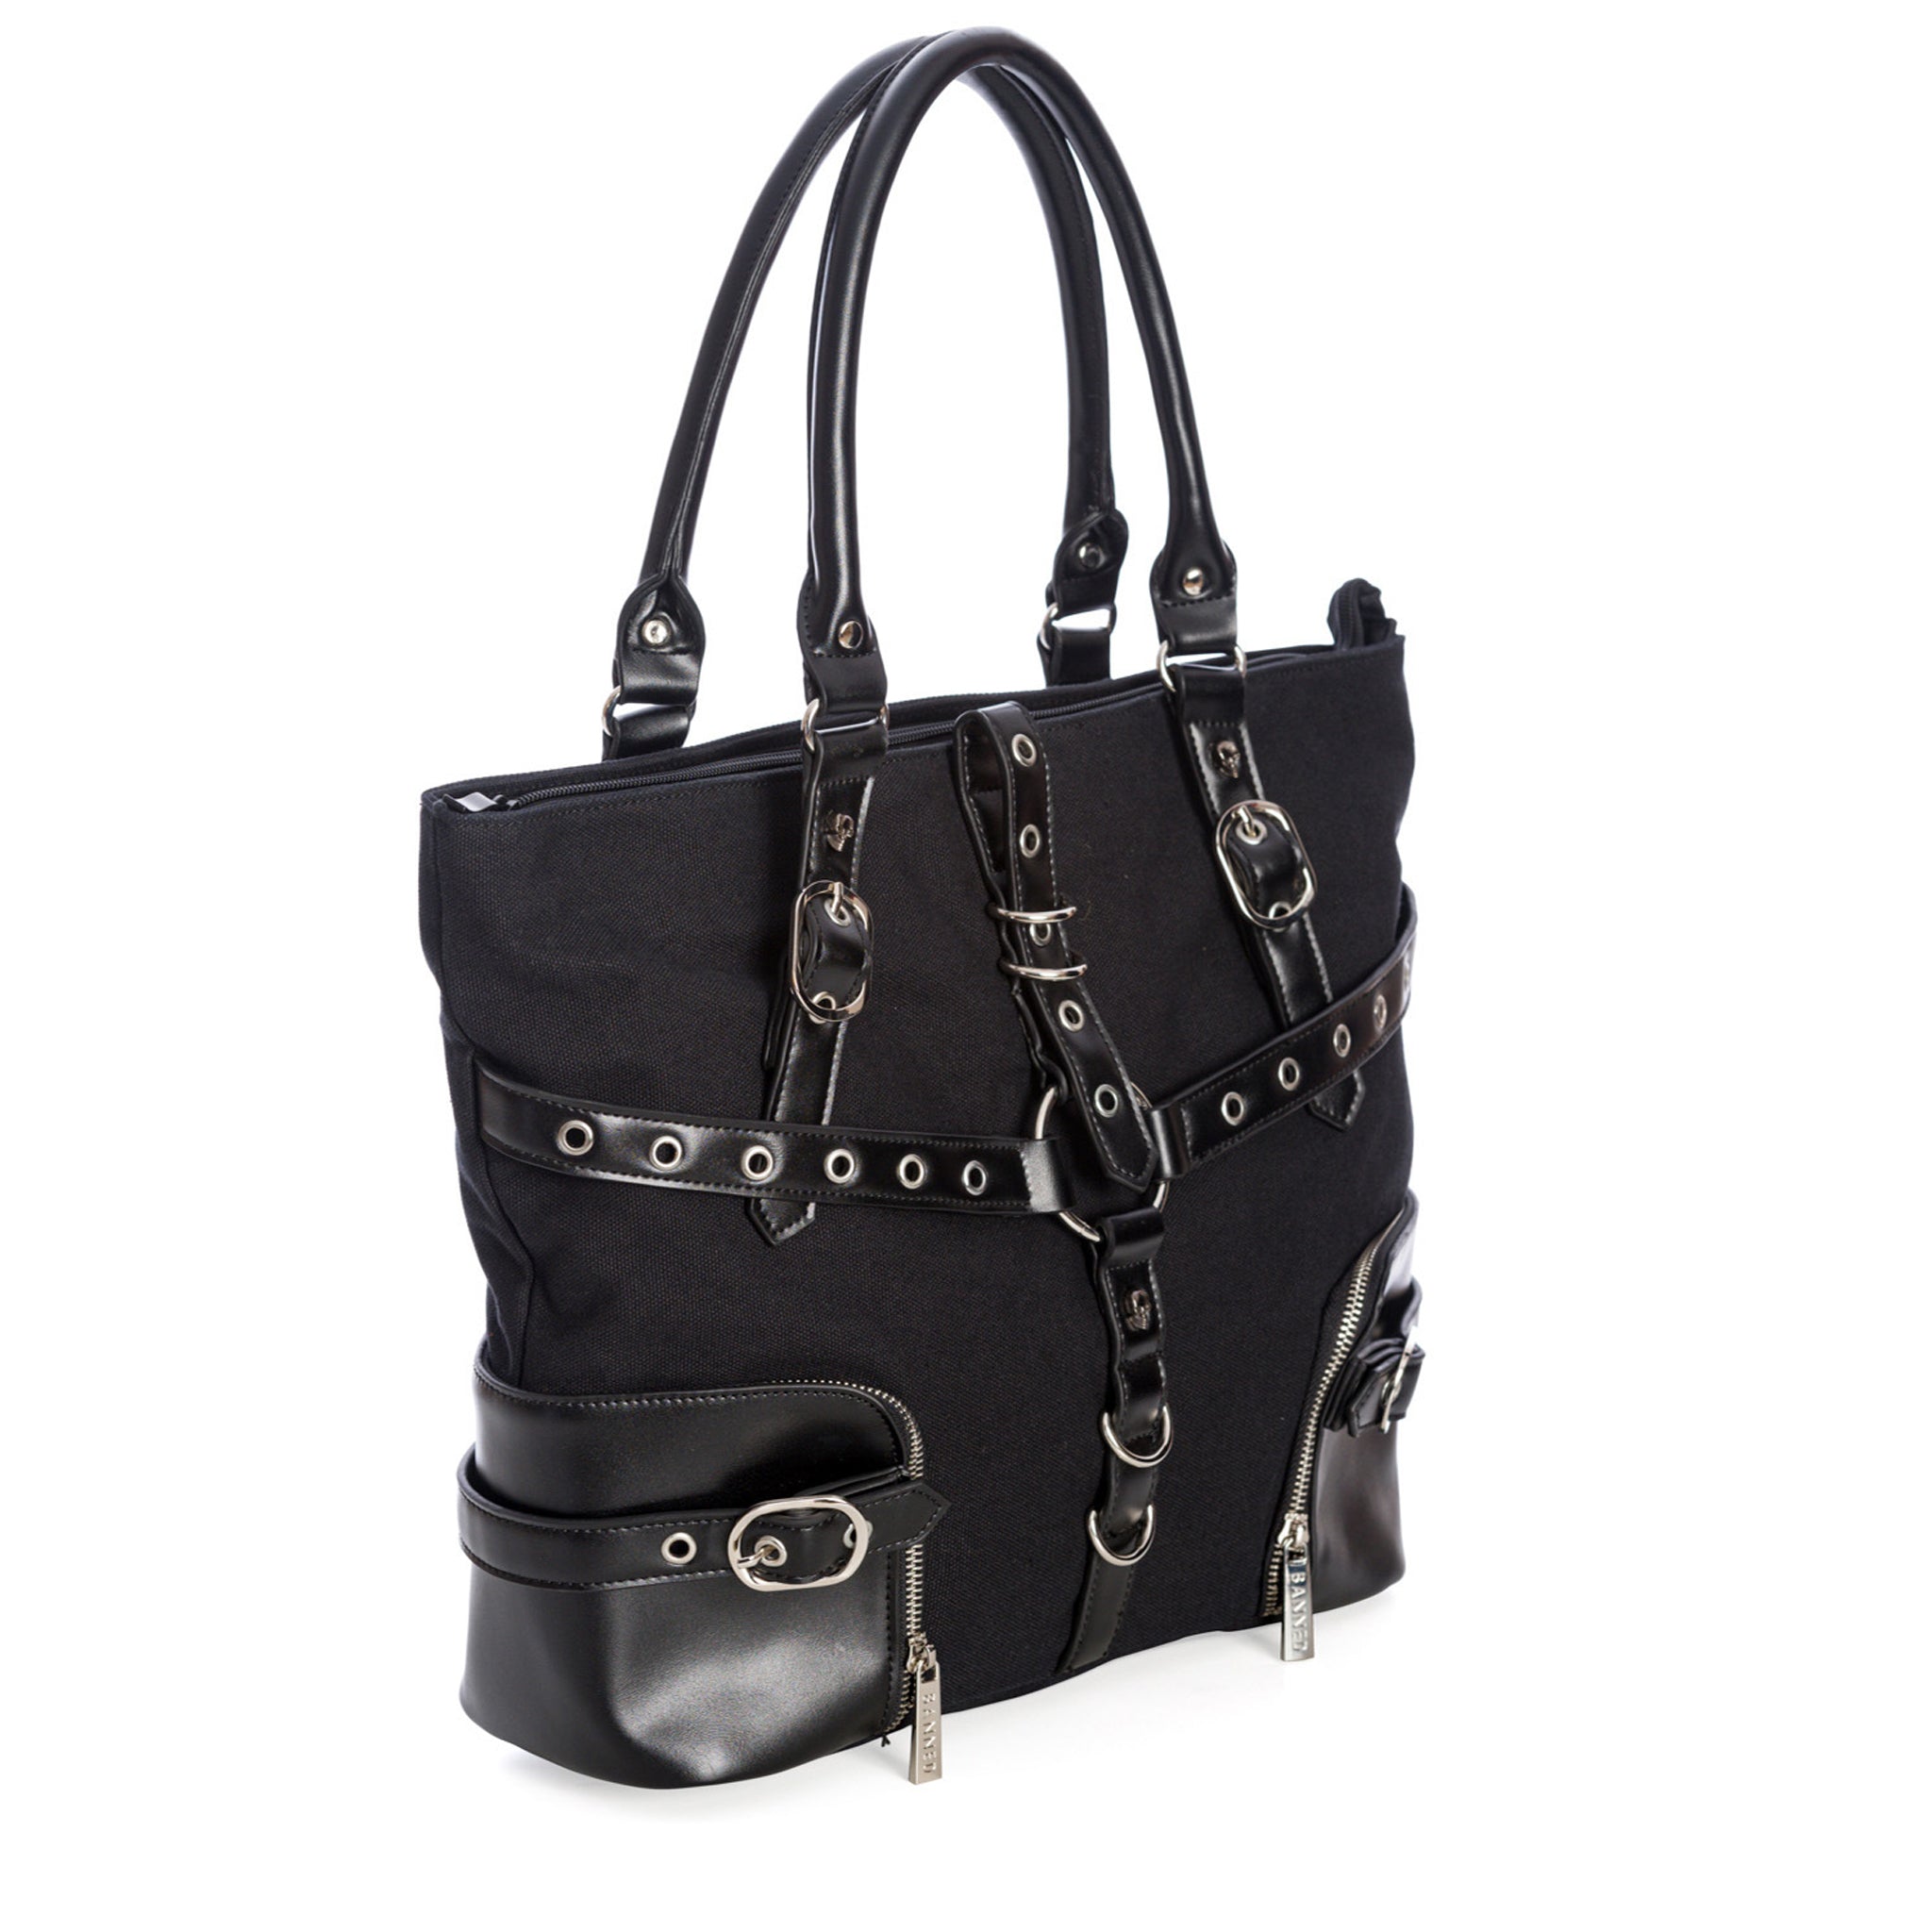 goths travel too tote